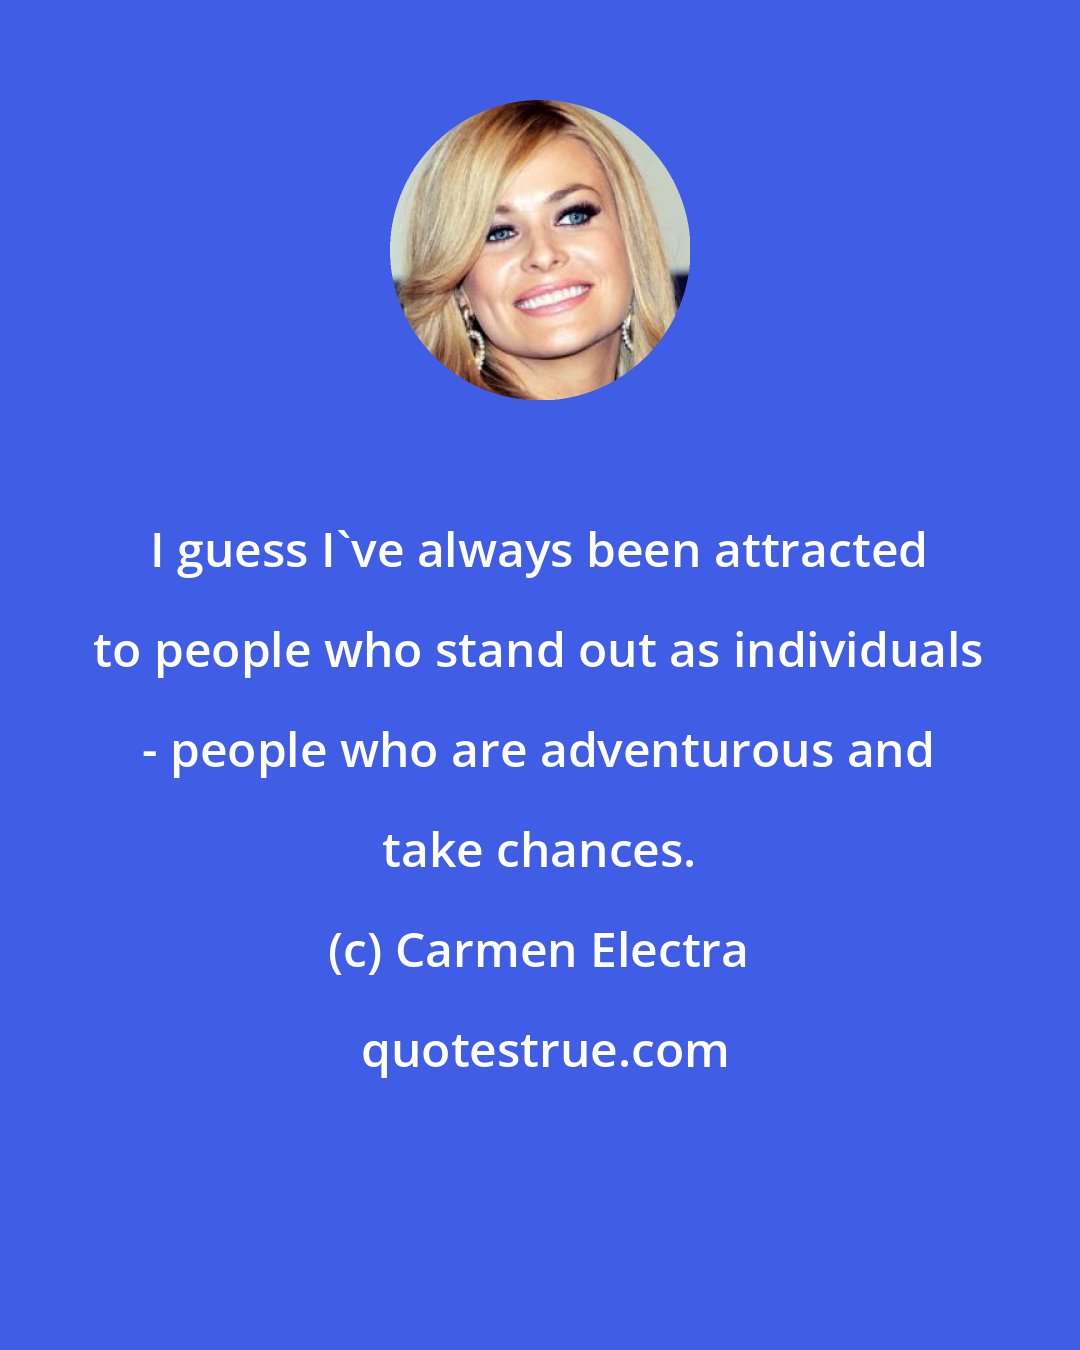 Carmen Electra: I guess I've always been attracted to people who stand out as individuals - people who are adventurous and take chances.